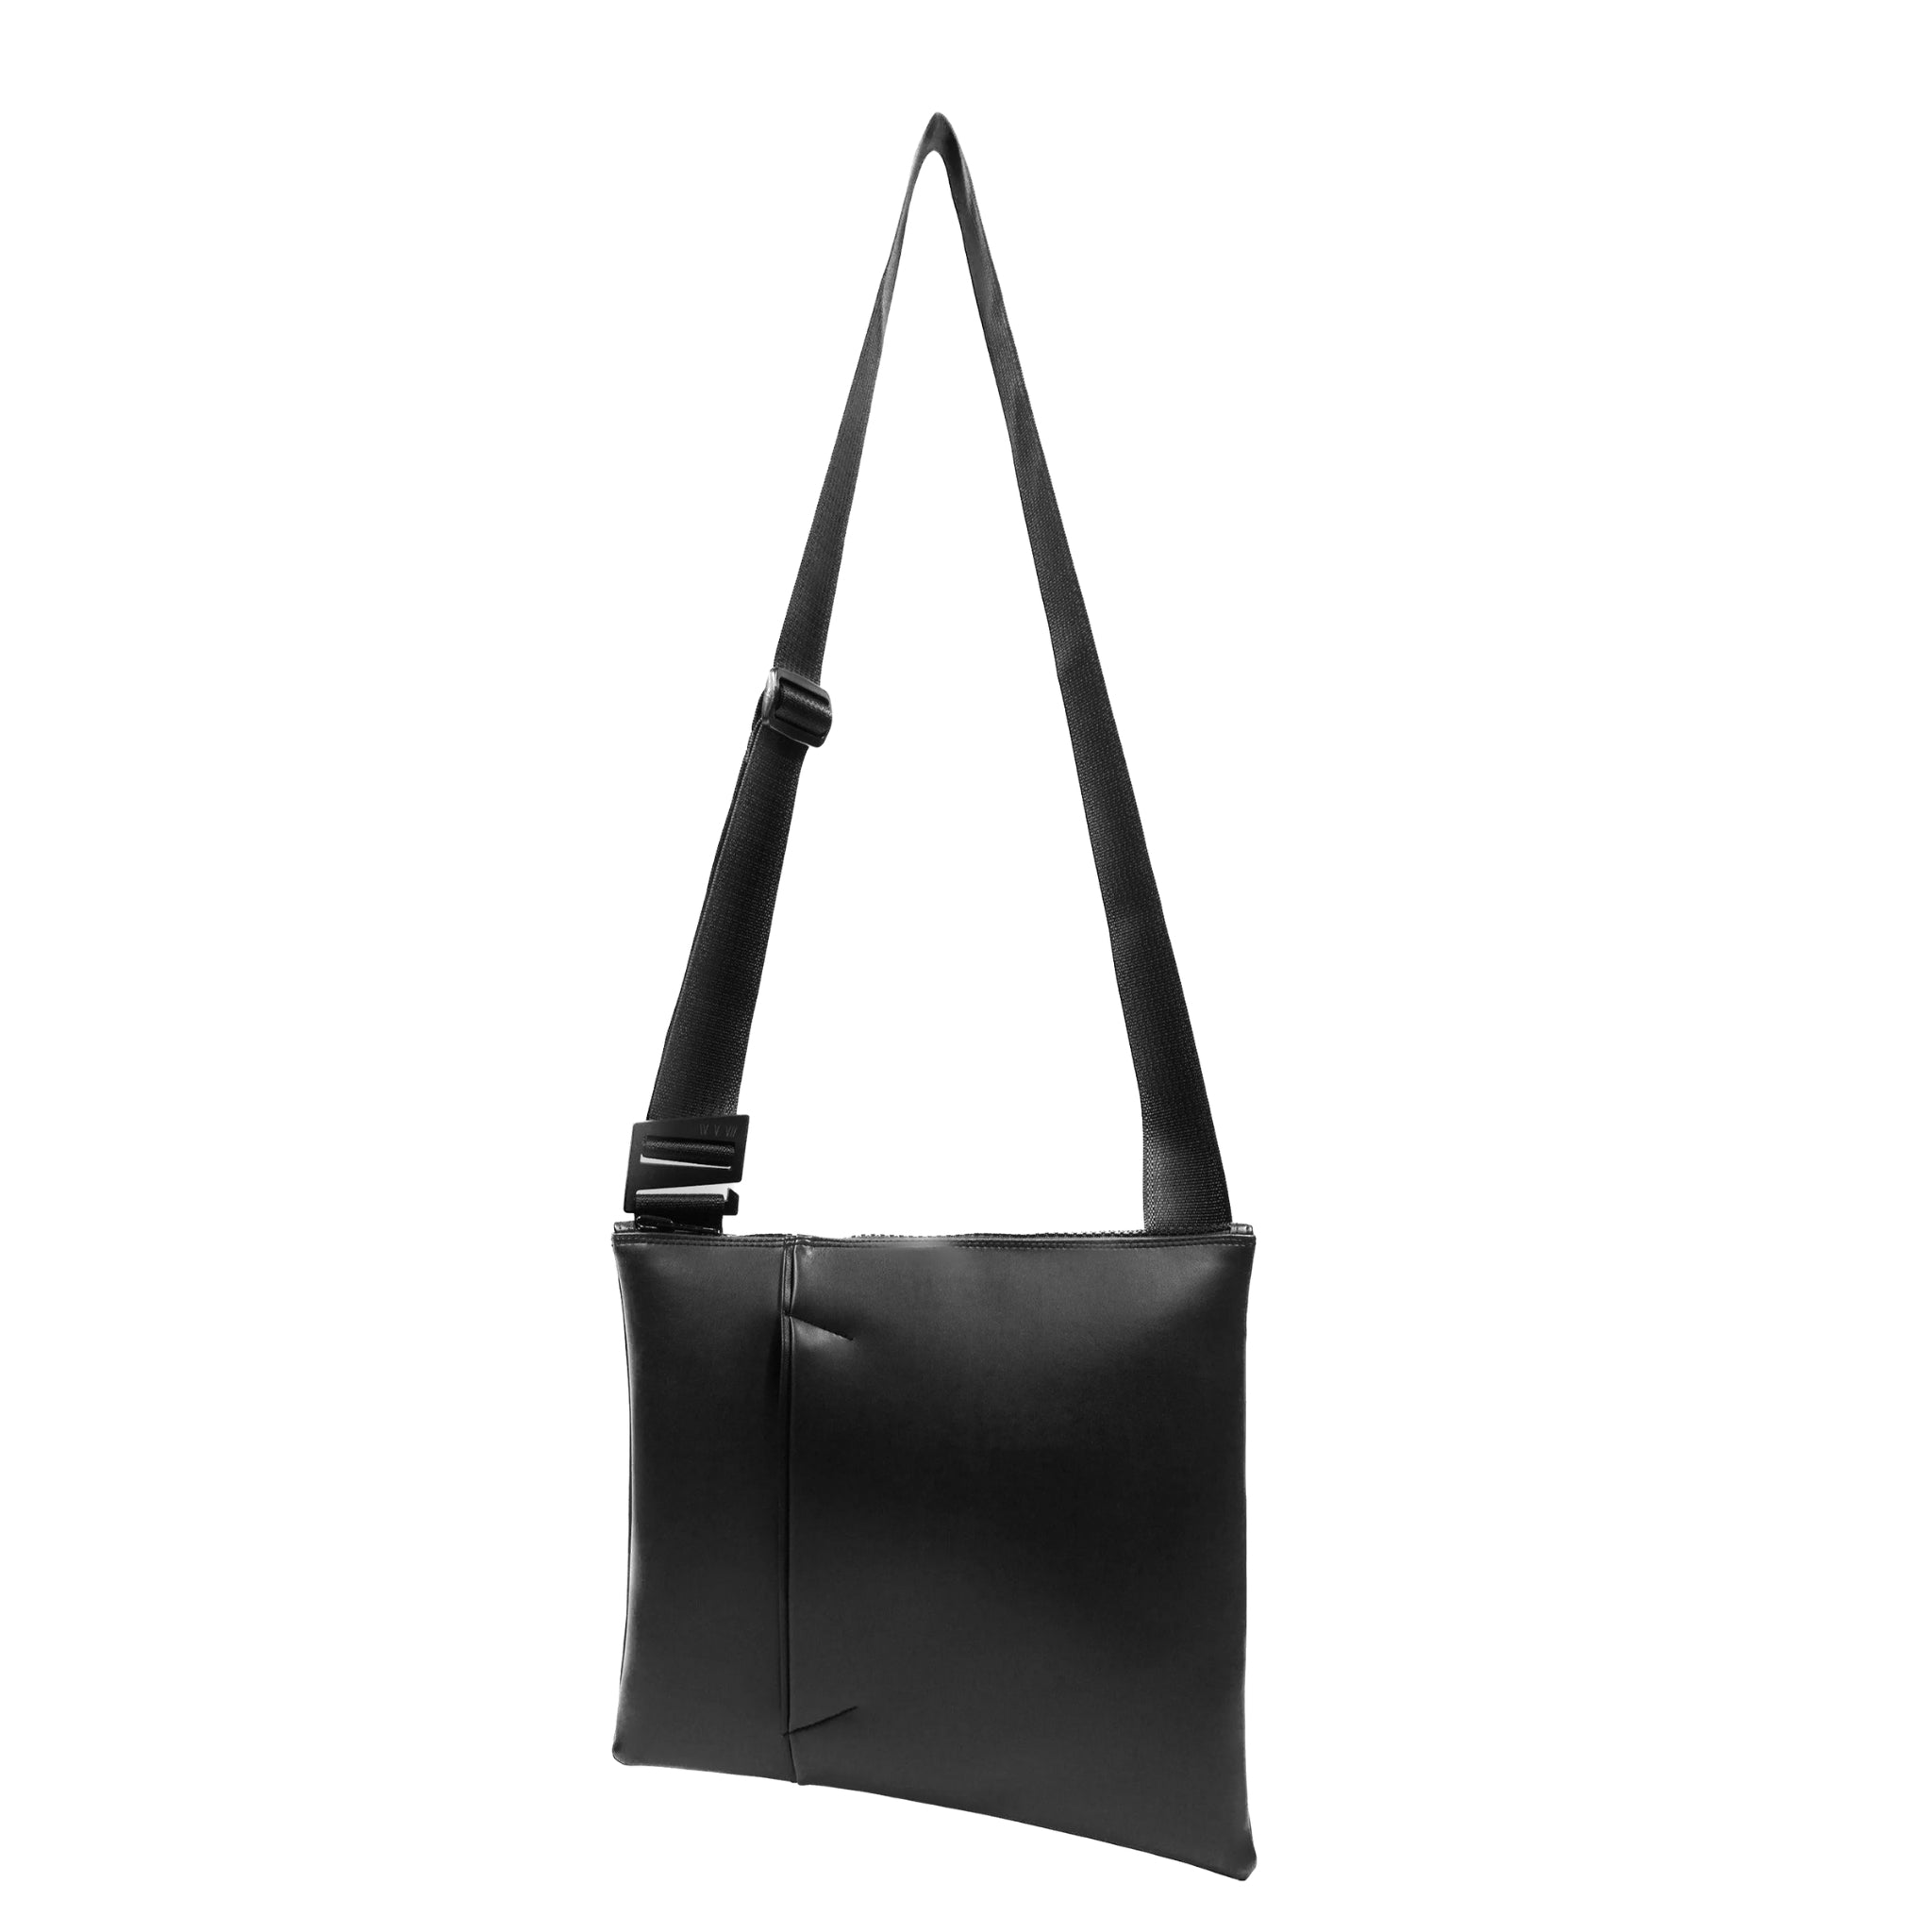 The ANDO satchel in black vegan leather (desserto). Product shown at the front/center of a white background